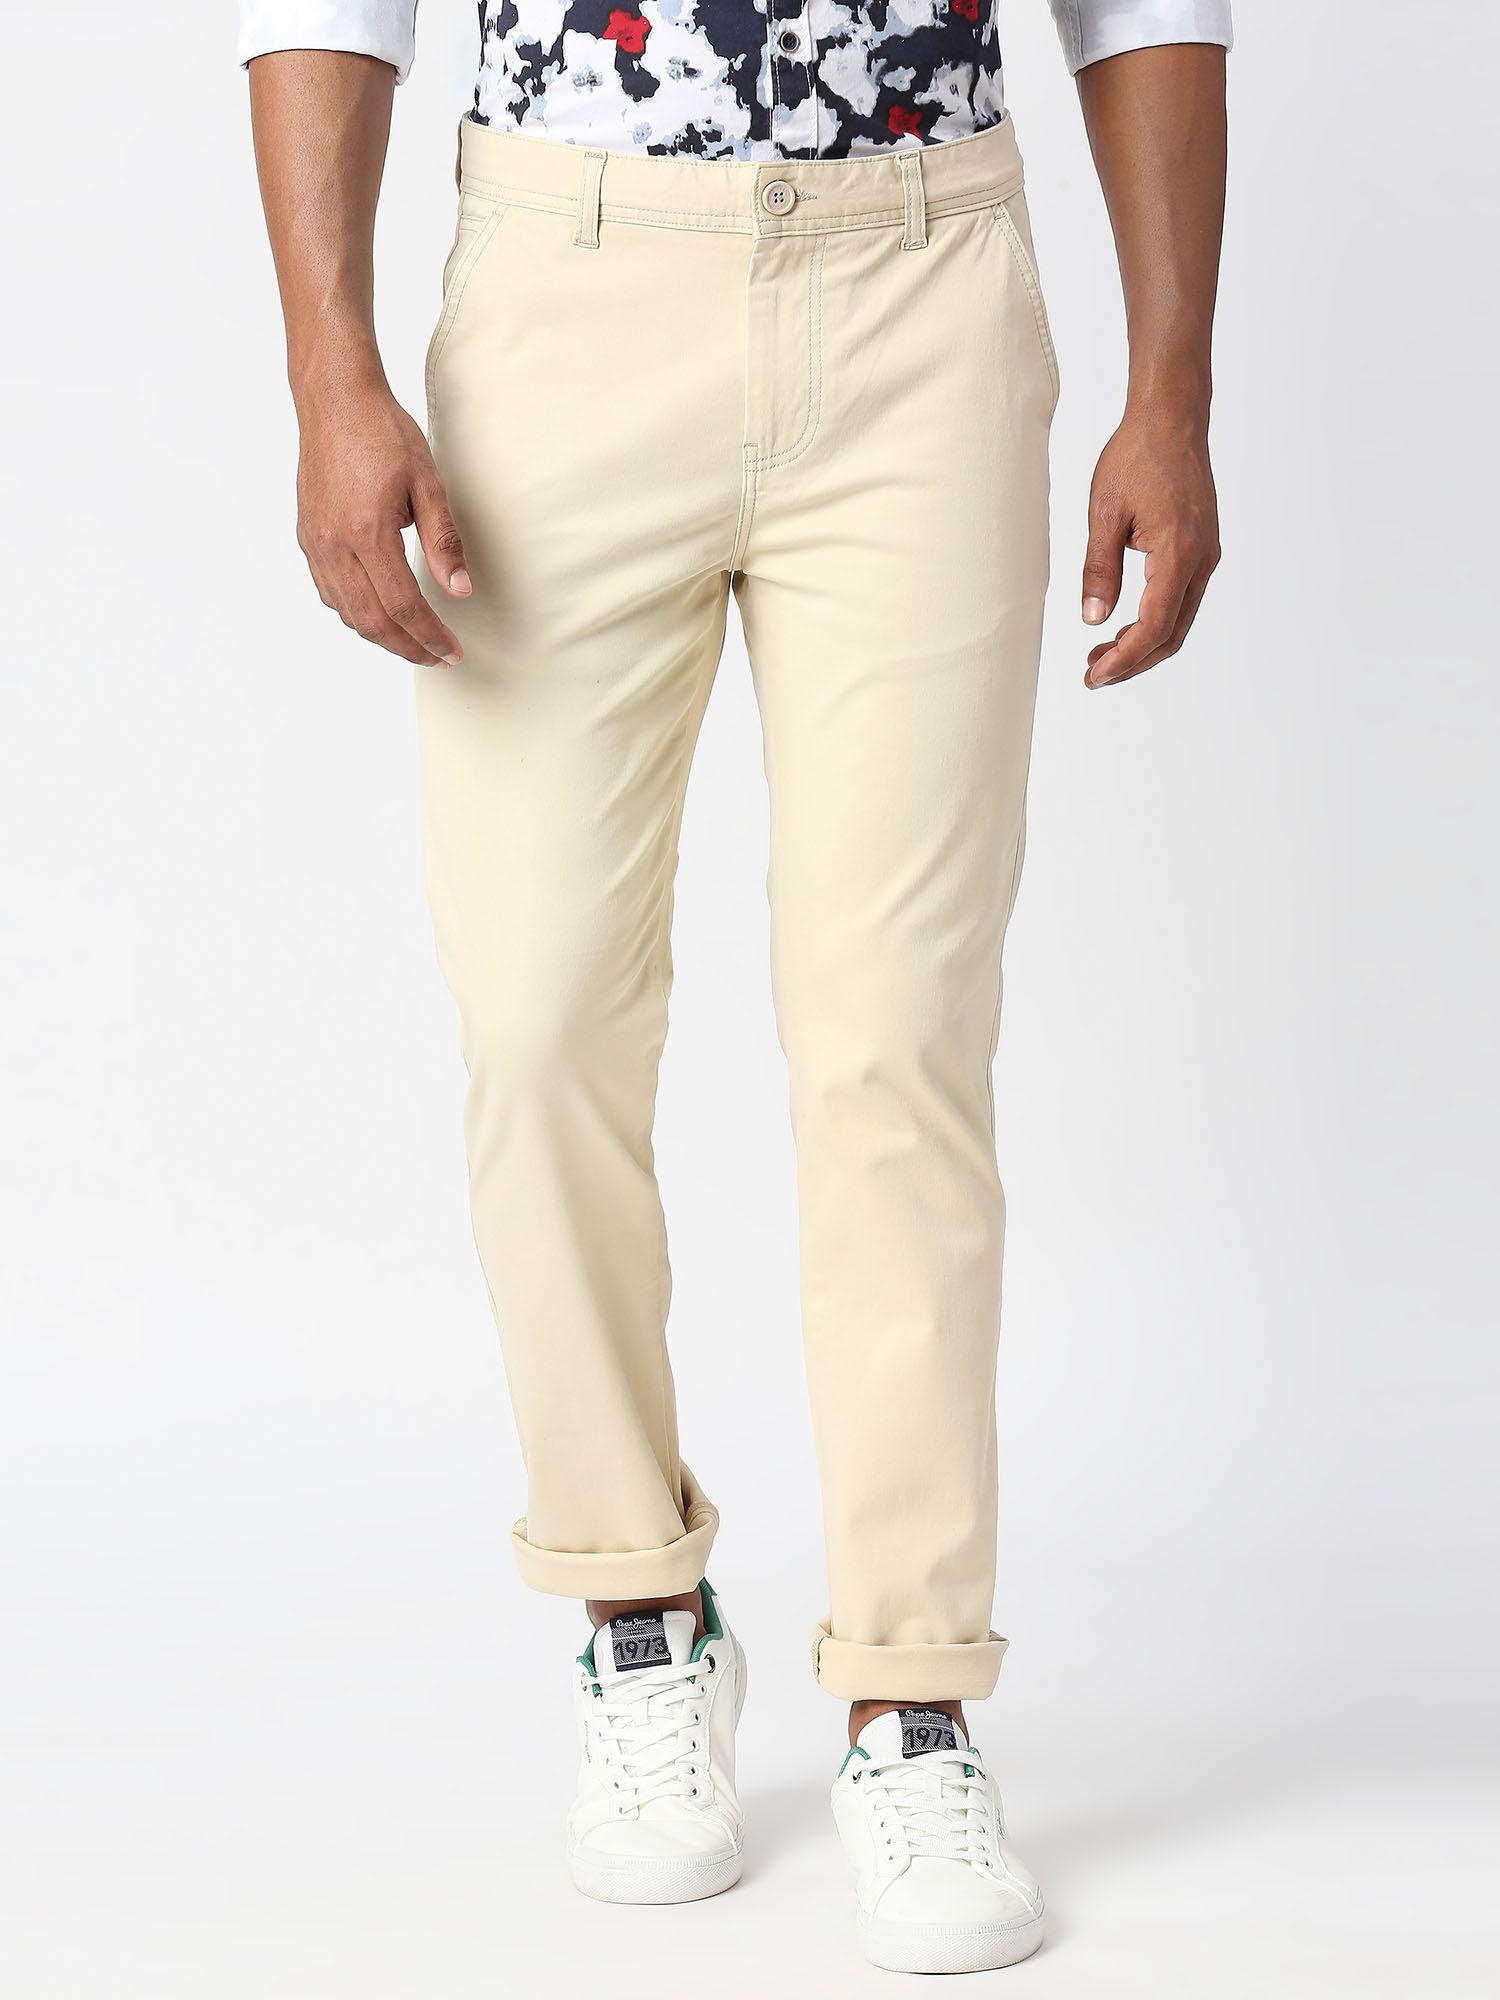 mullet casual chinos pants beige